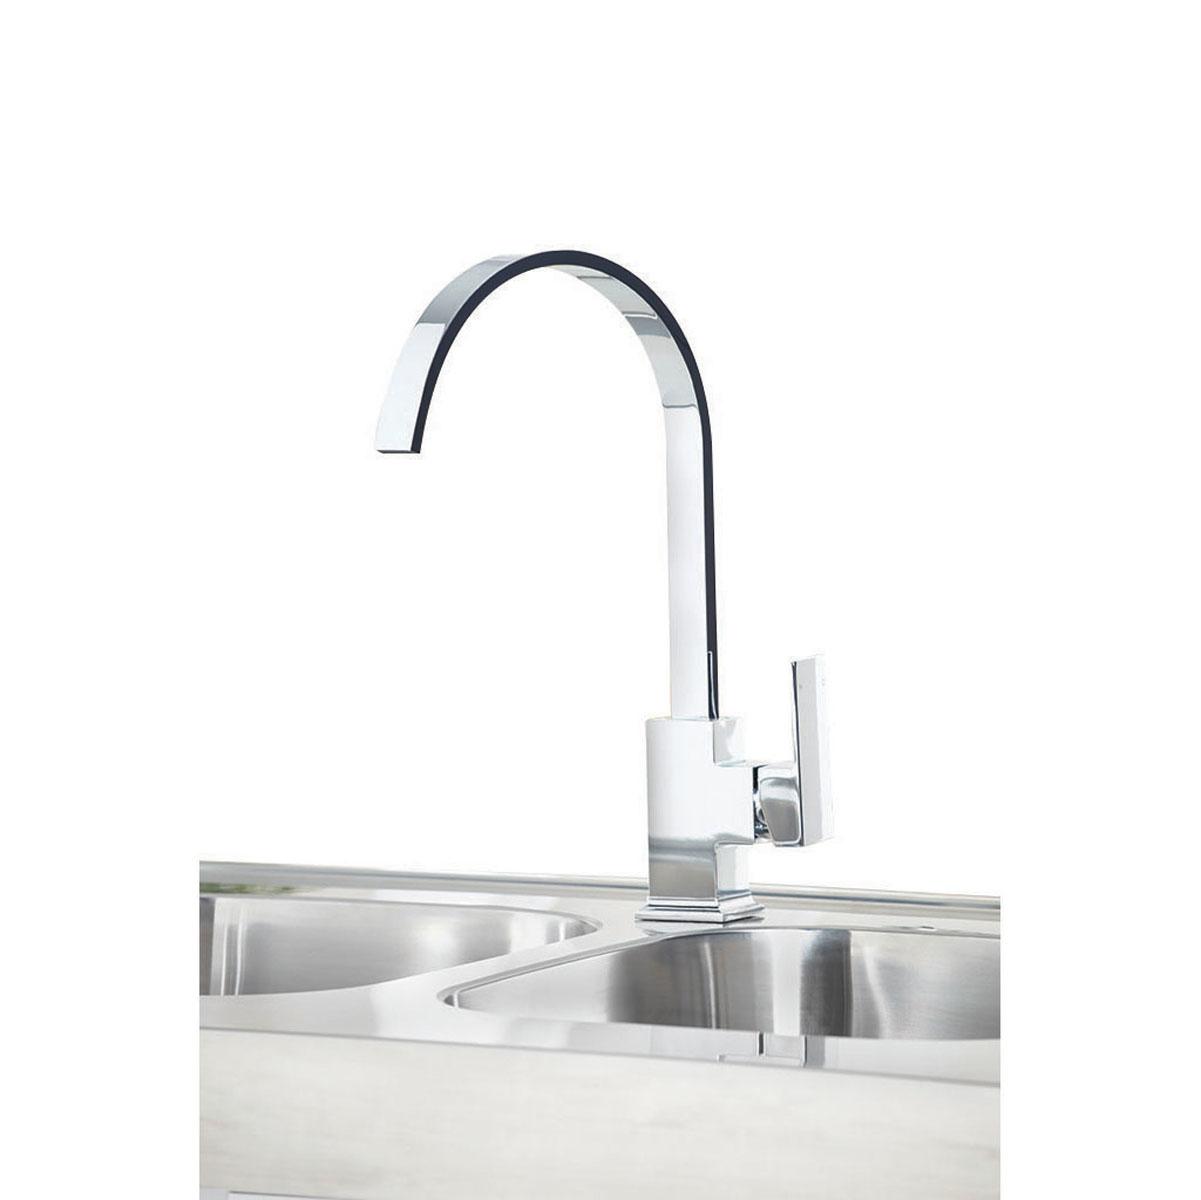 An image of Ava Square Single Lever Kitchen Sink Mixer Tap - Chrome